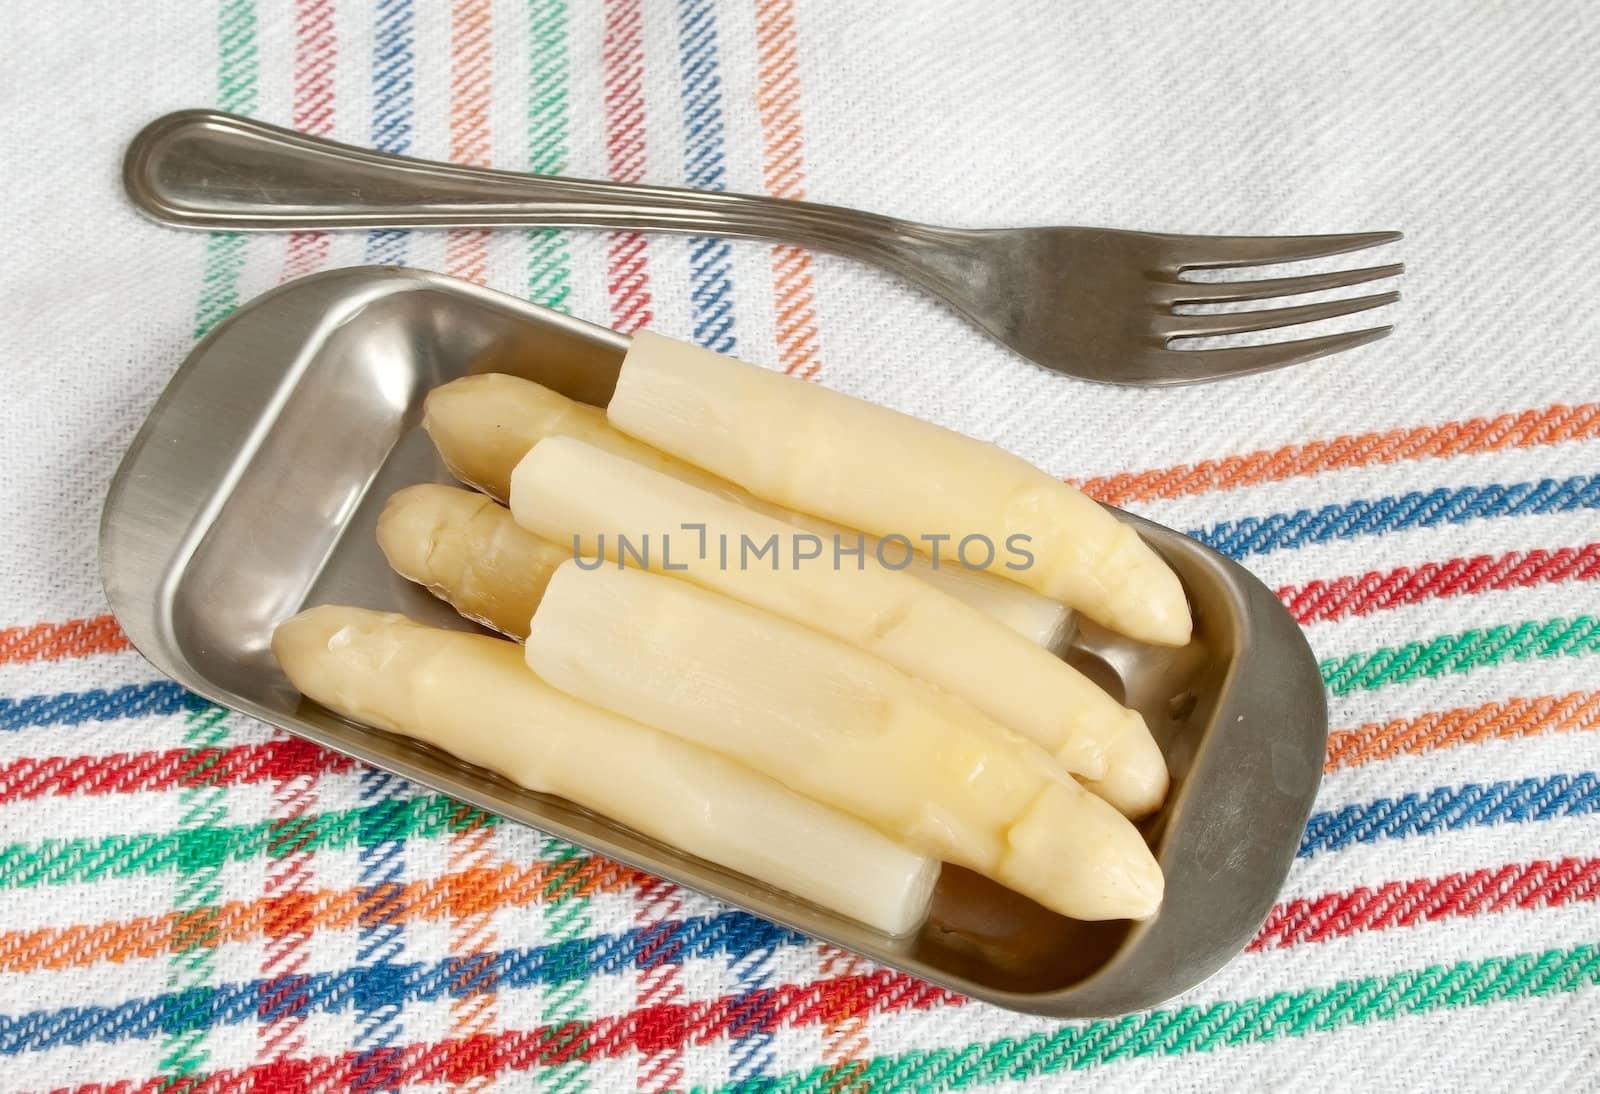 White asparagus in small plate on table-cloth